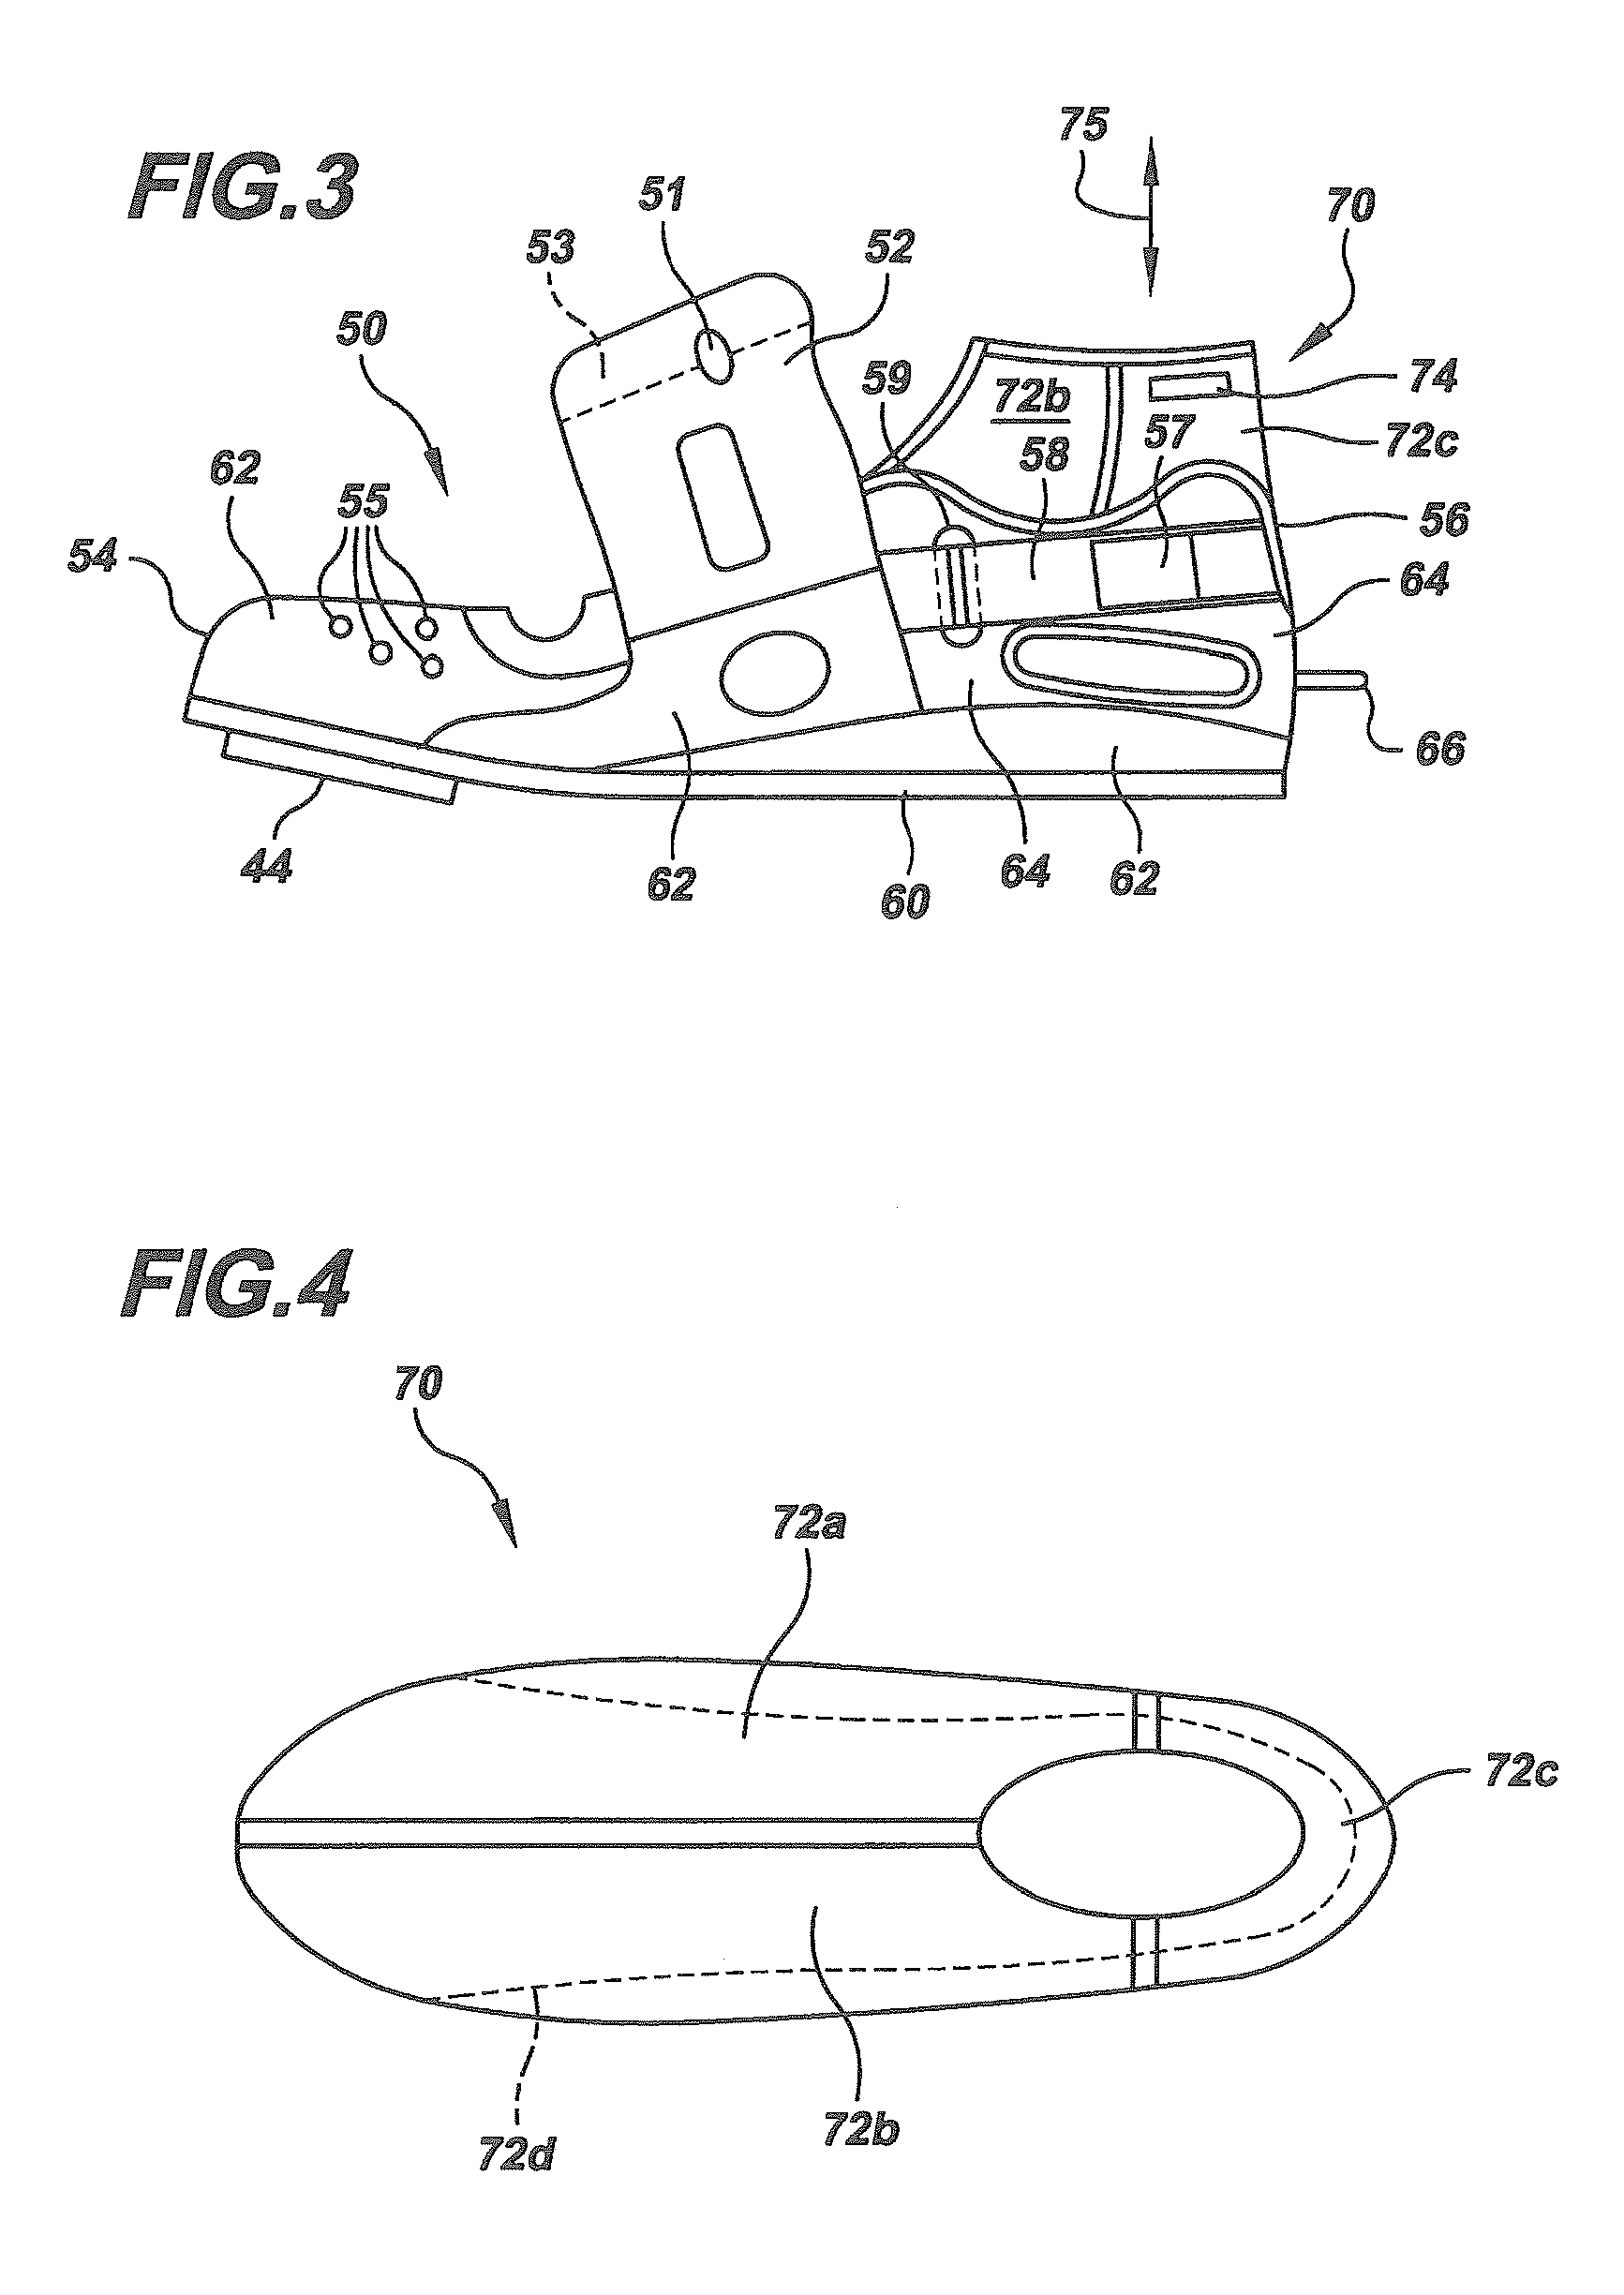 Rowing shell shoe system